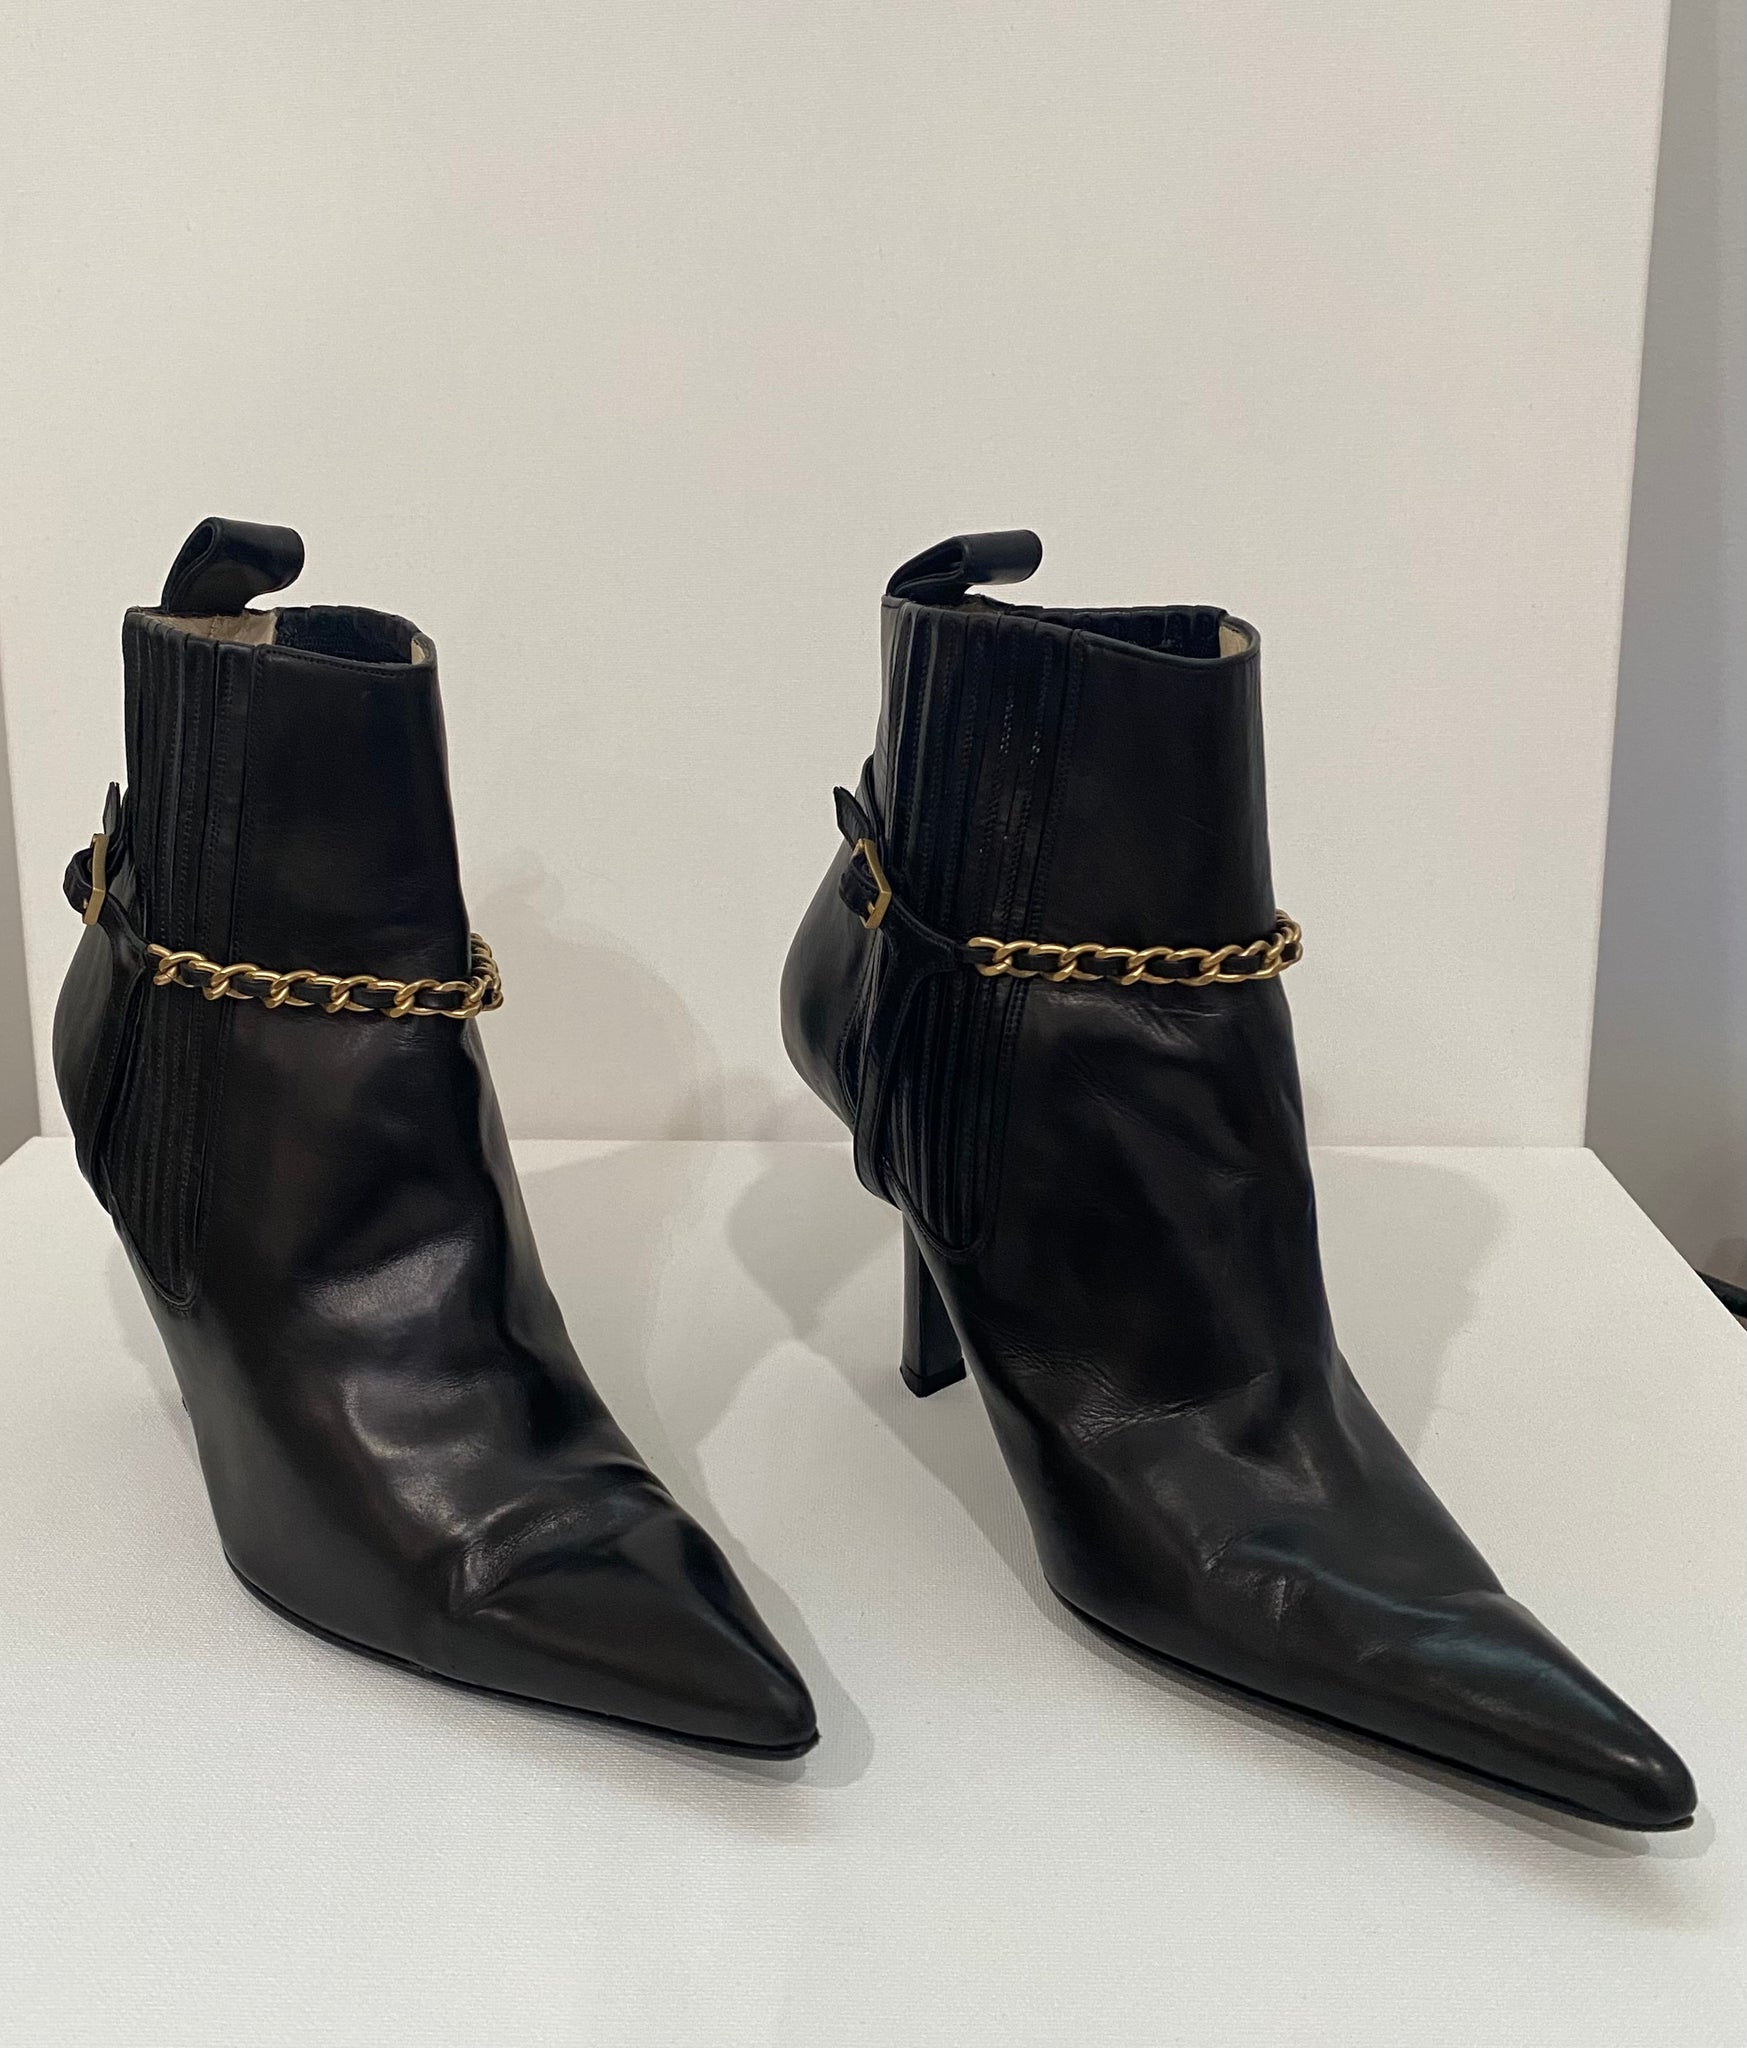 Vintage 90's Chanel Black Leather Pointed Toe Boots – For the Ages